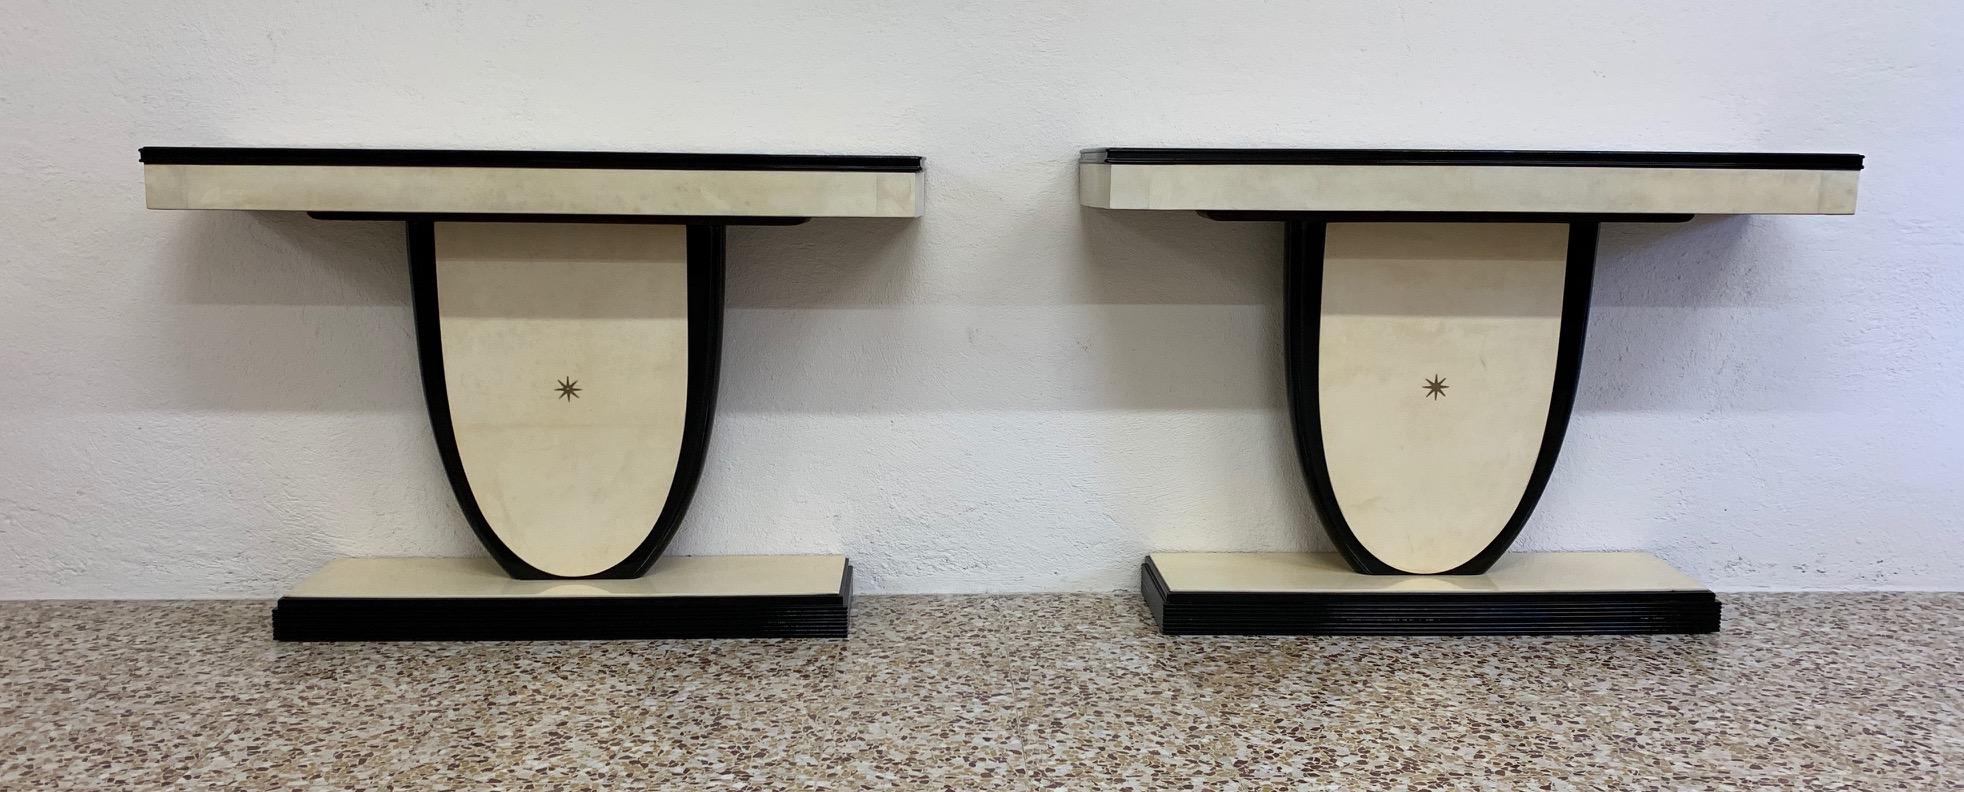 This pair of consoles was produced in Italy in the 1940s.
The front part of the base and tops are covered with parchment leather with black lacquered profiles, while the central detail is a brass star.